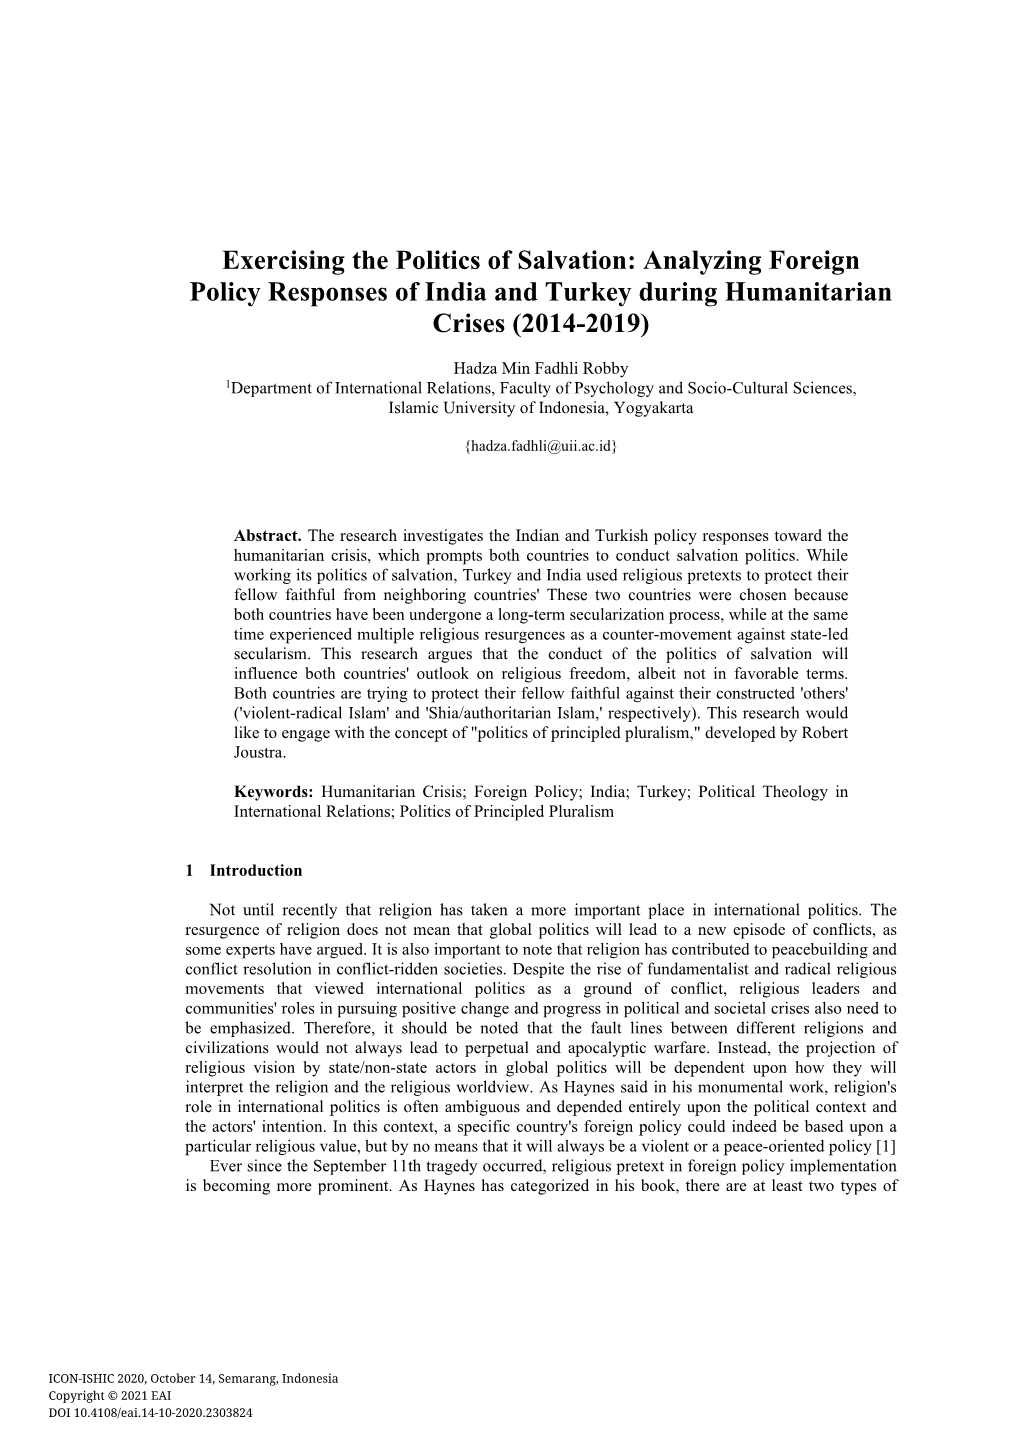 Exercising the Politics of Salvation: Analyzing Foreign Policy Responses of India and Turkey During Humanitarian Crises (2014-2019)